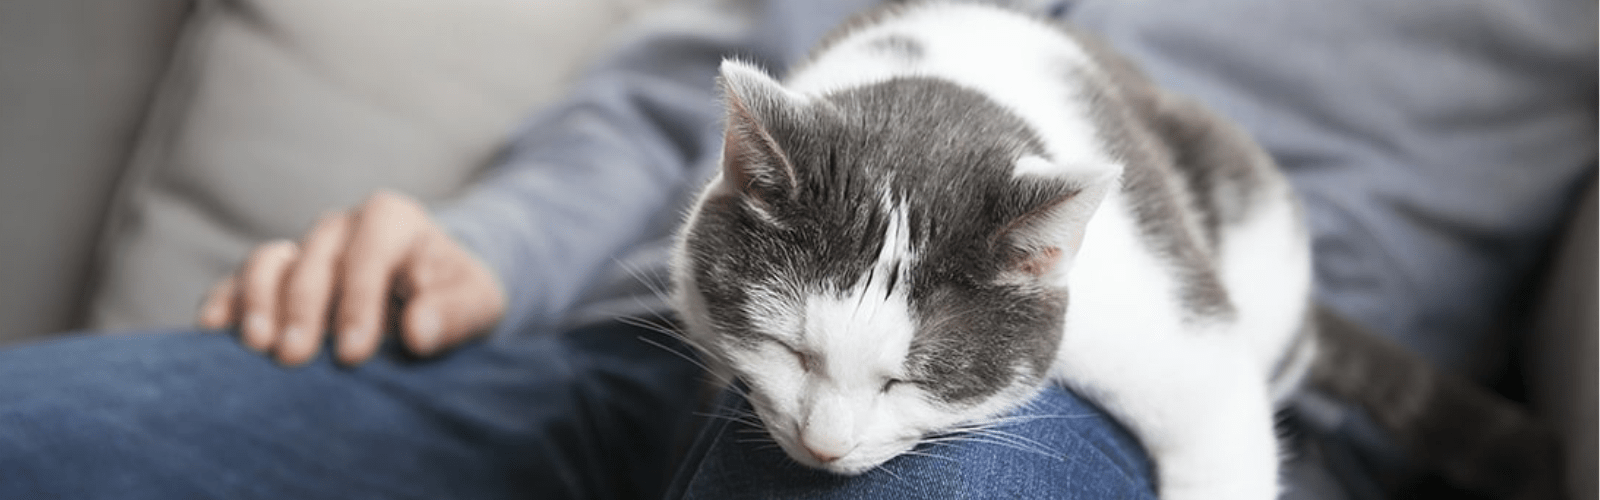 A grey and white cat sat on their owner’s lap.